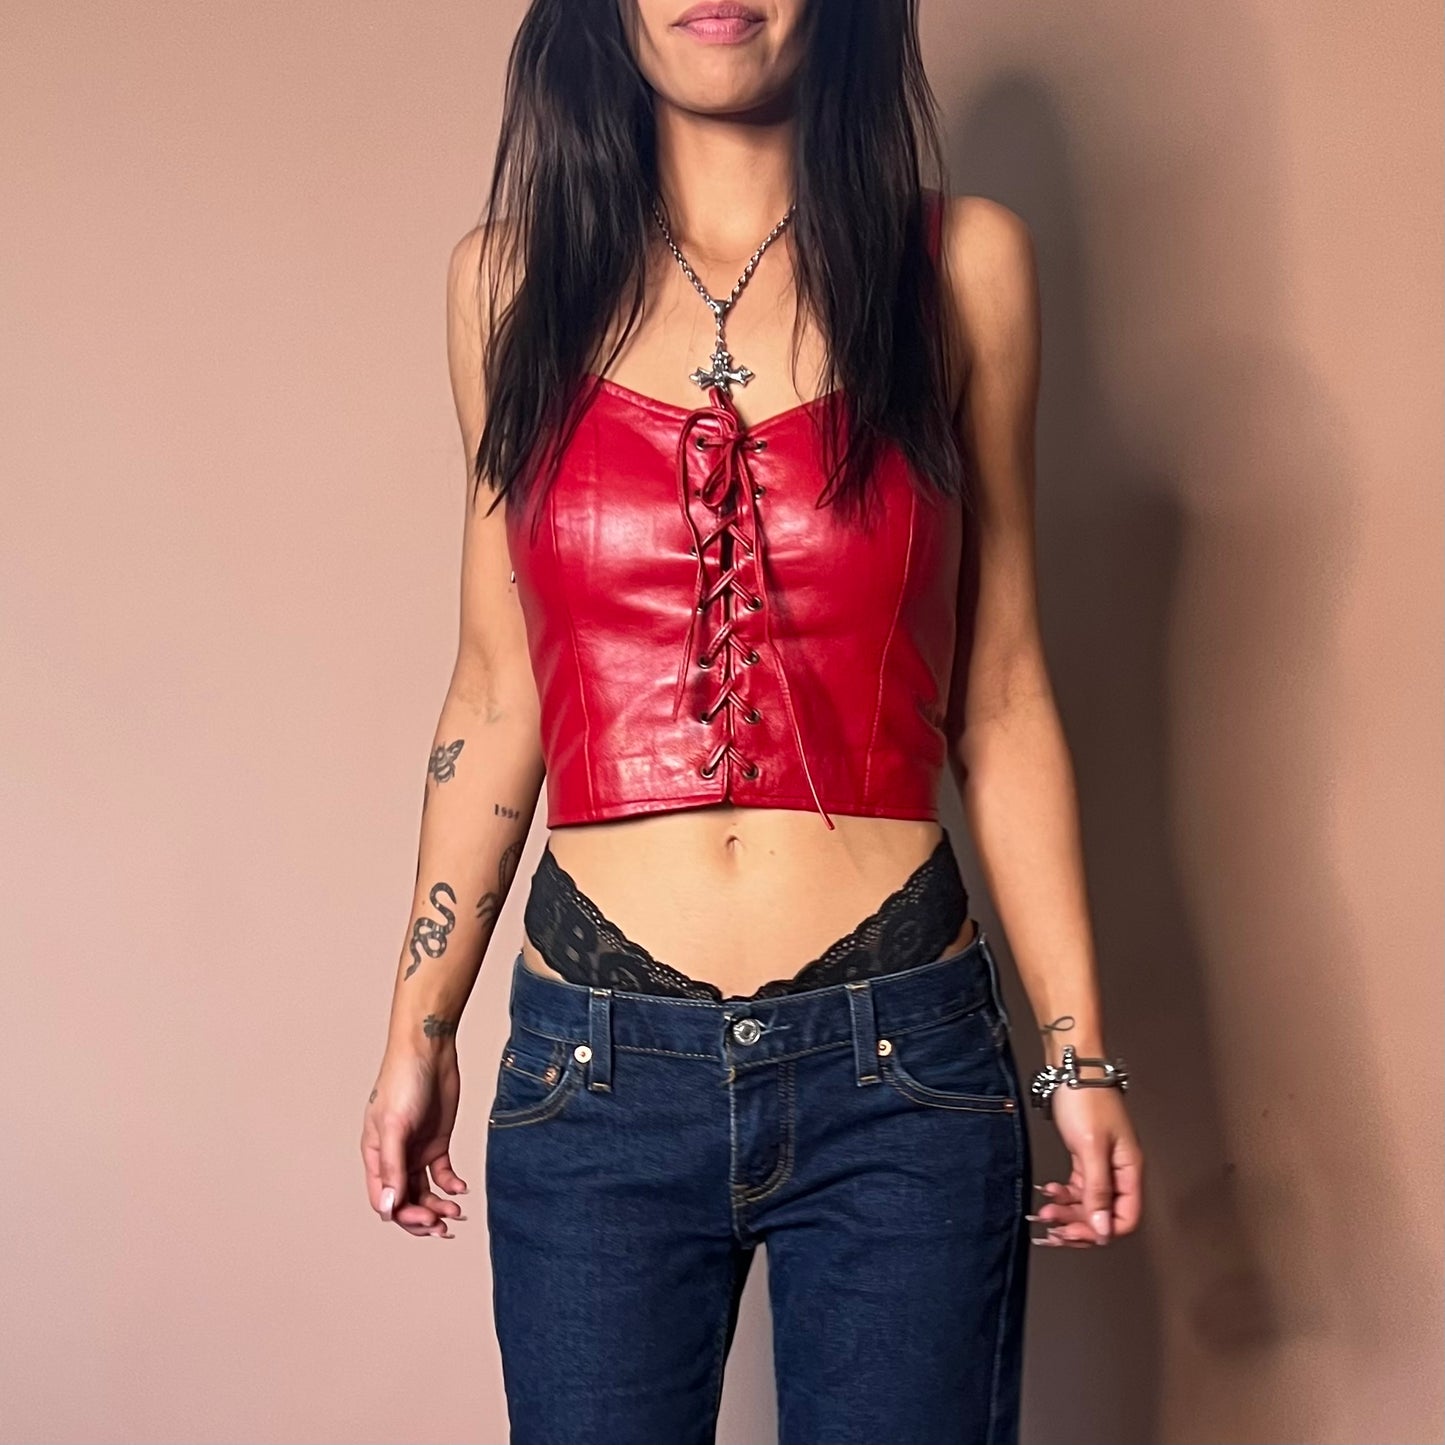 RED LEATHER LACE UP CORSET TOP